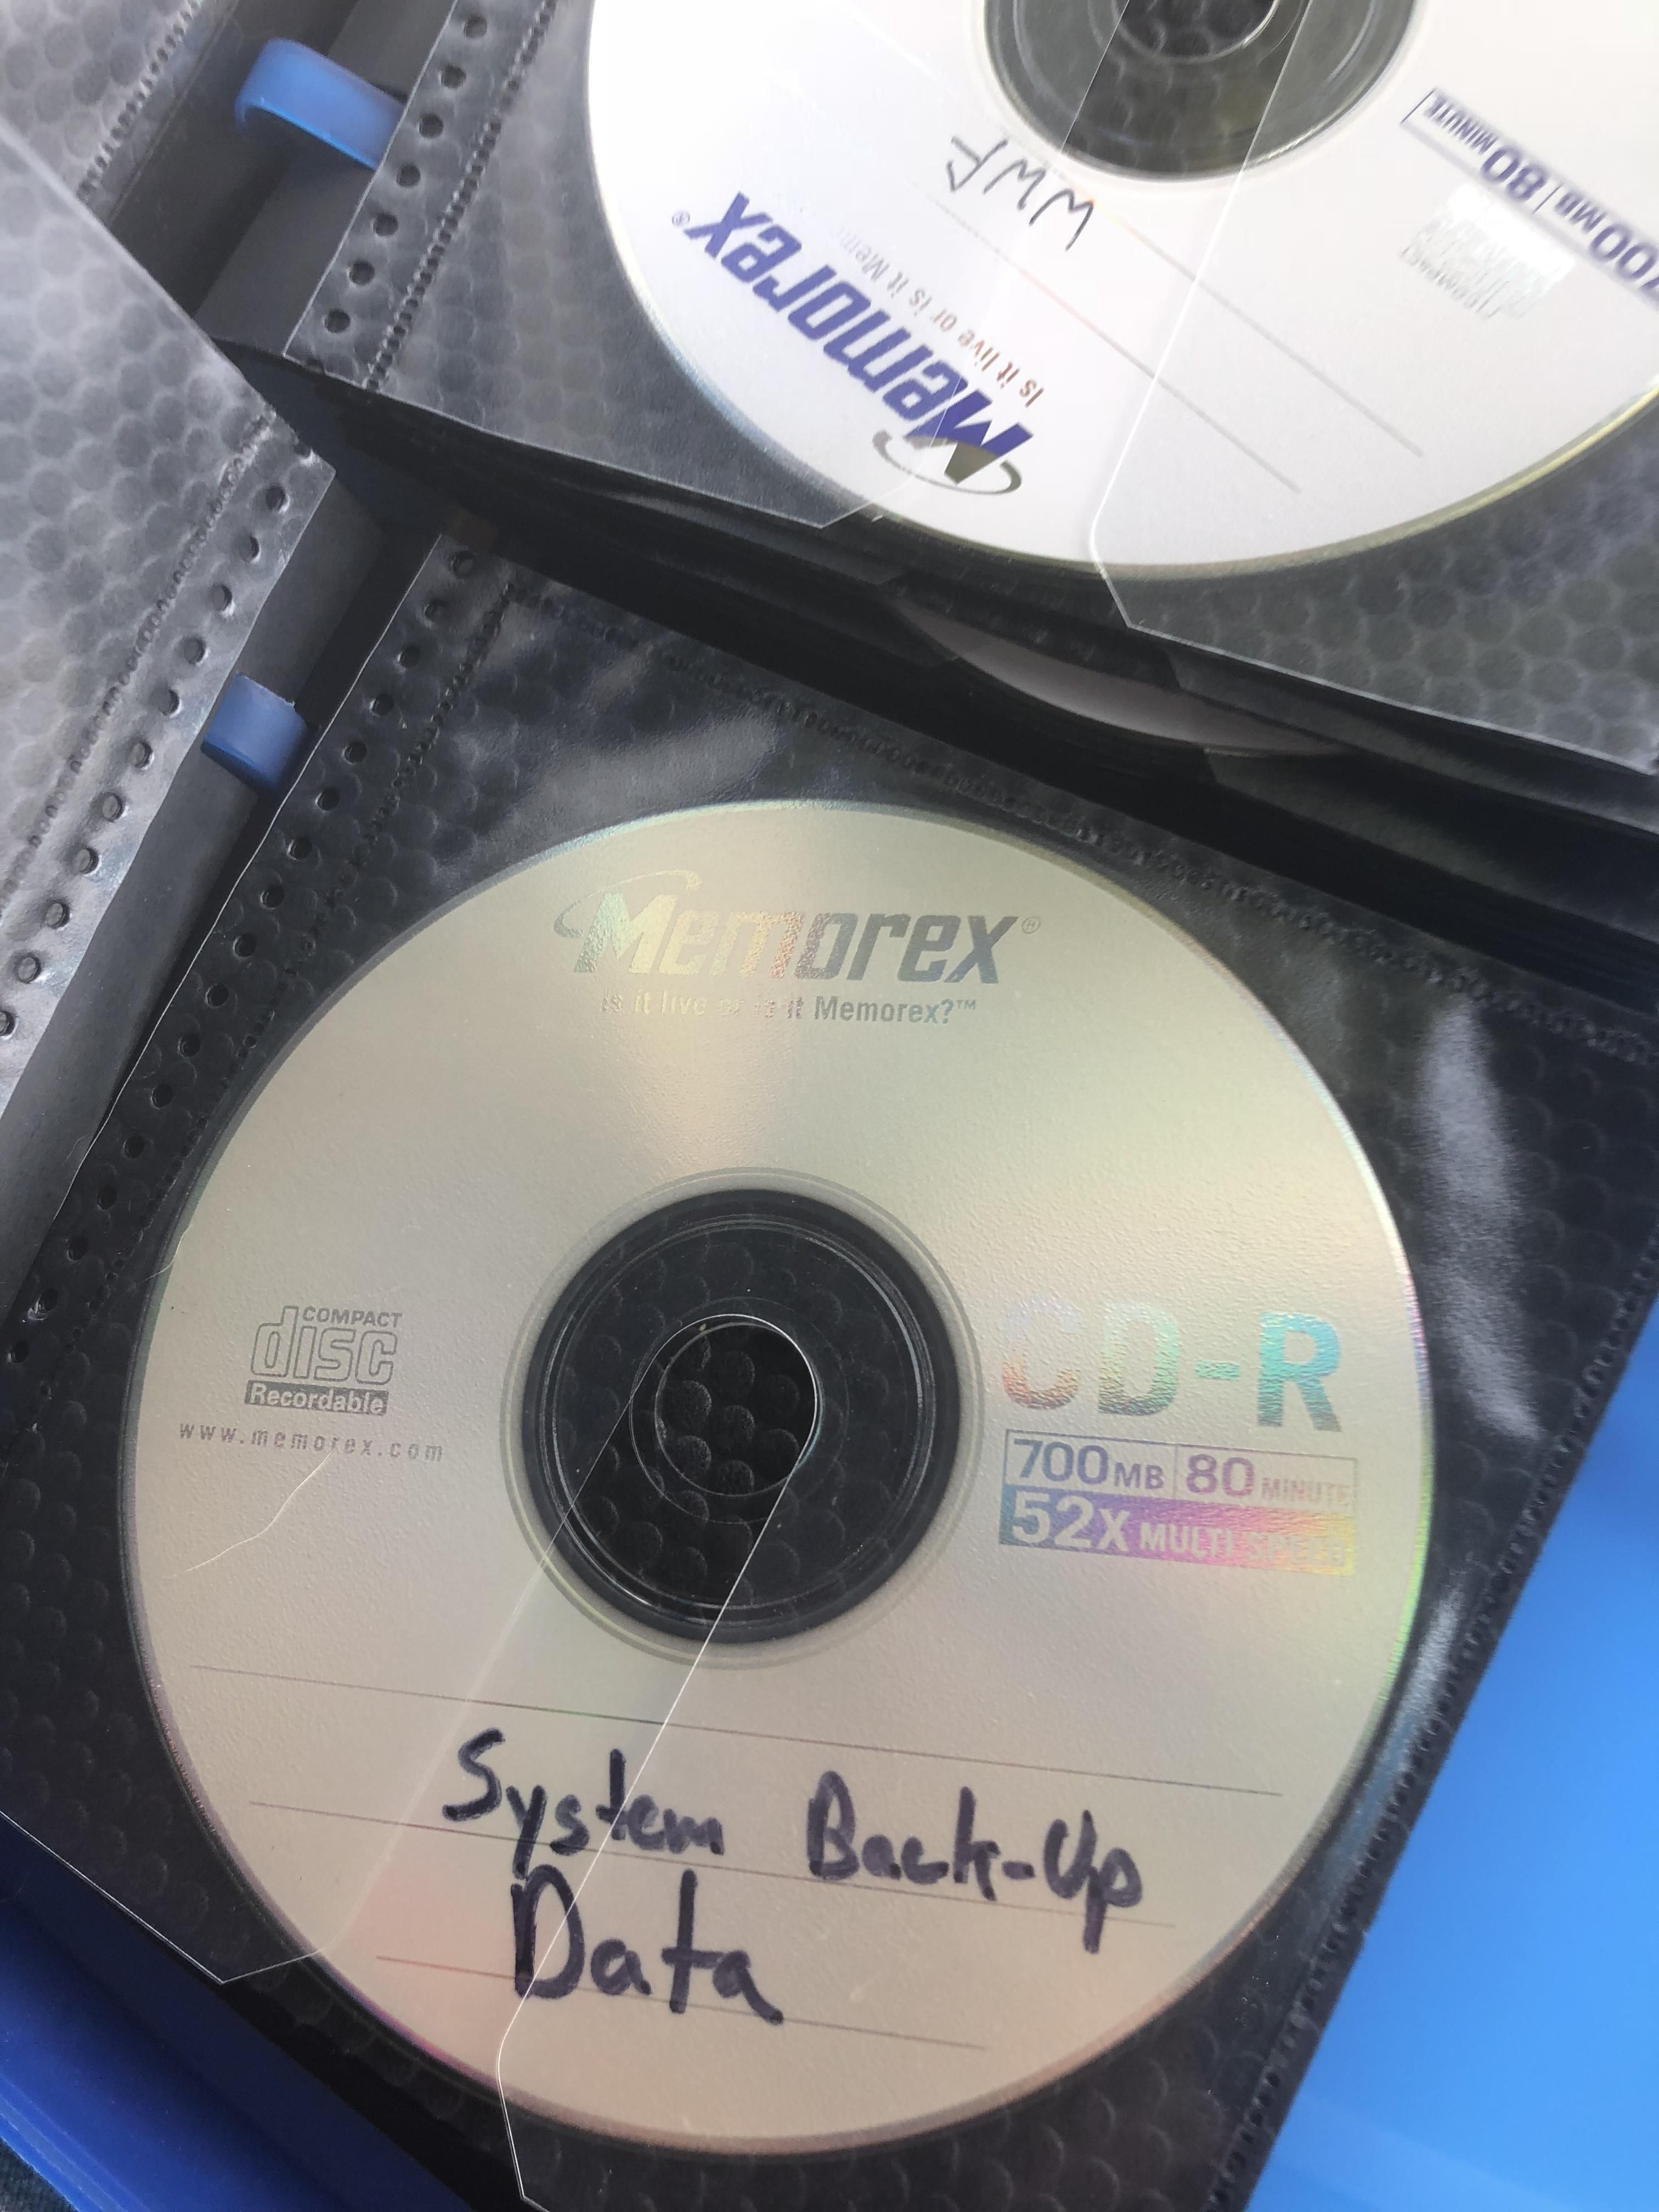 Found my husbands old CD folder. He said any guy who was in high school in the late 90’s/early 00’s would know what was actually on this...